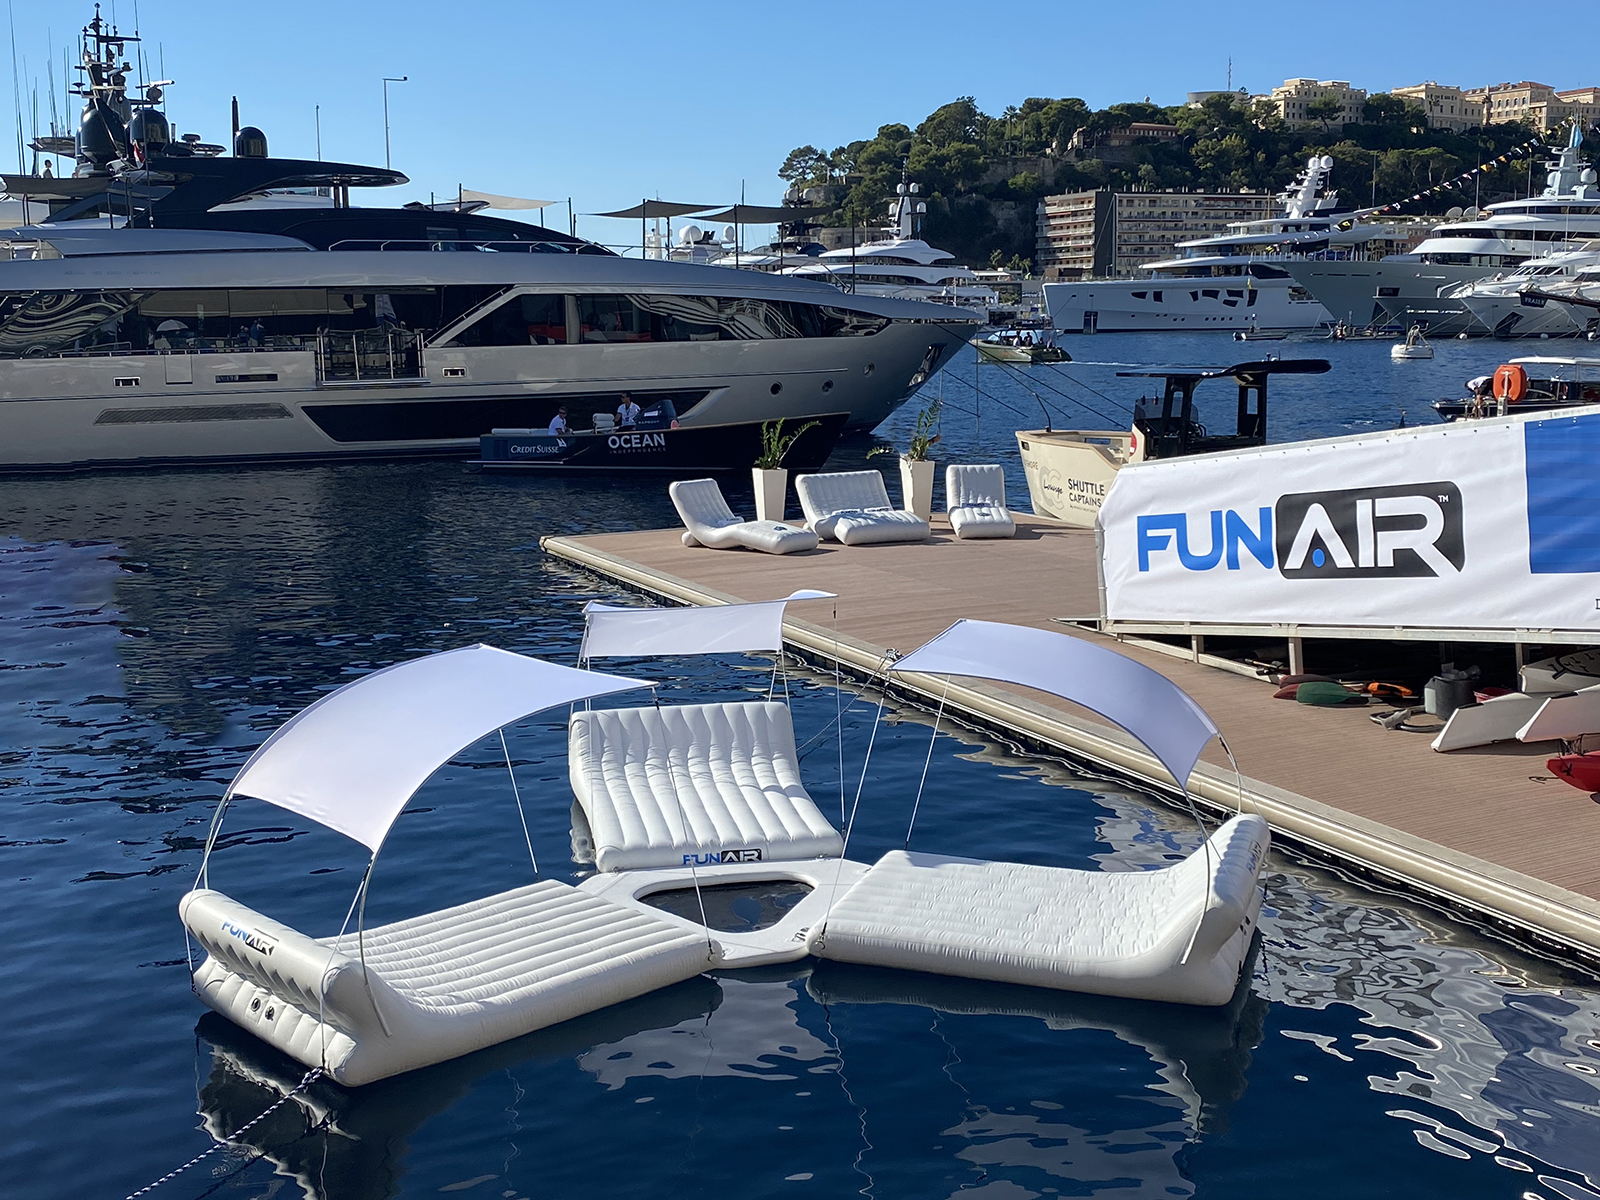 Three floating loungers connected together on the water, some of the best superyacht toys for relaxing